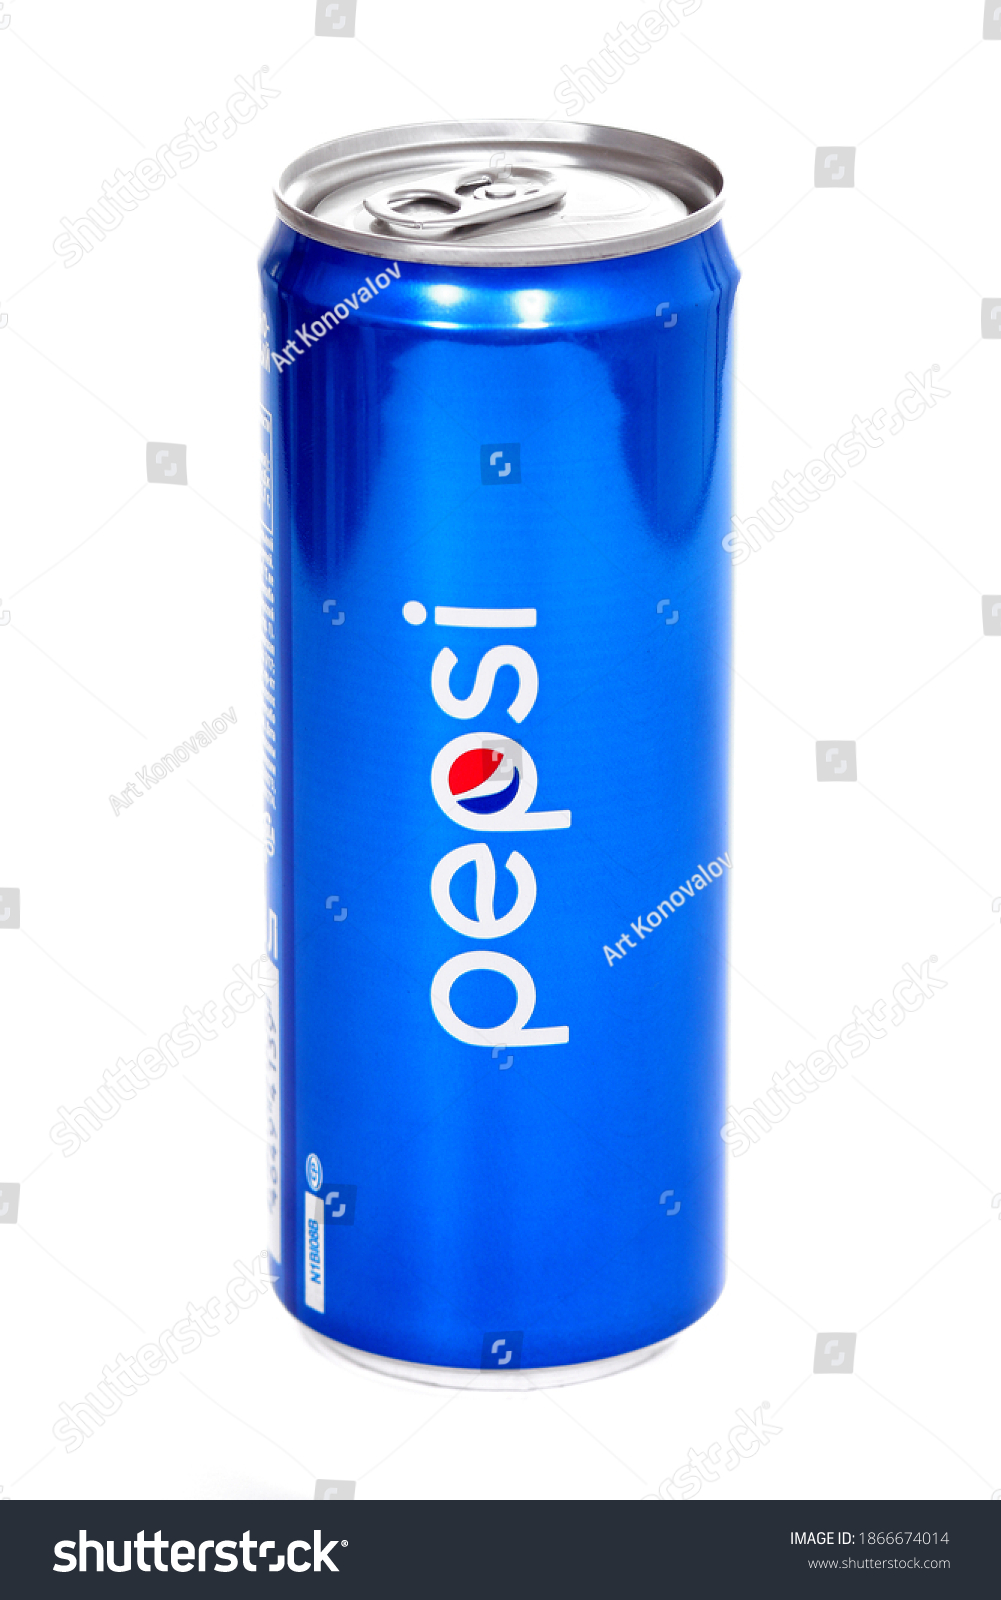 14 Pepsi Tall Can Images, Stock Photos & Vectors | Shutterstock